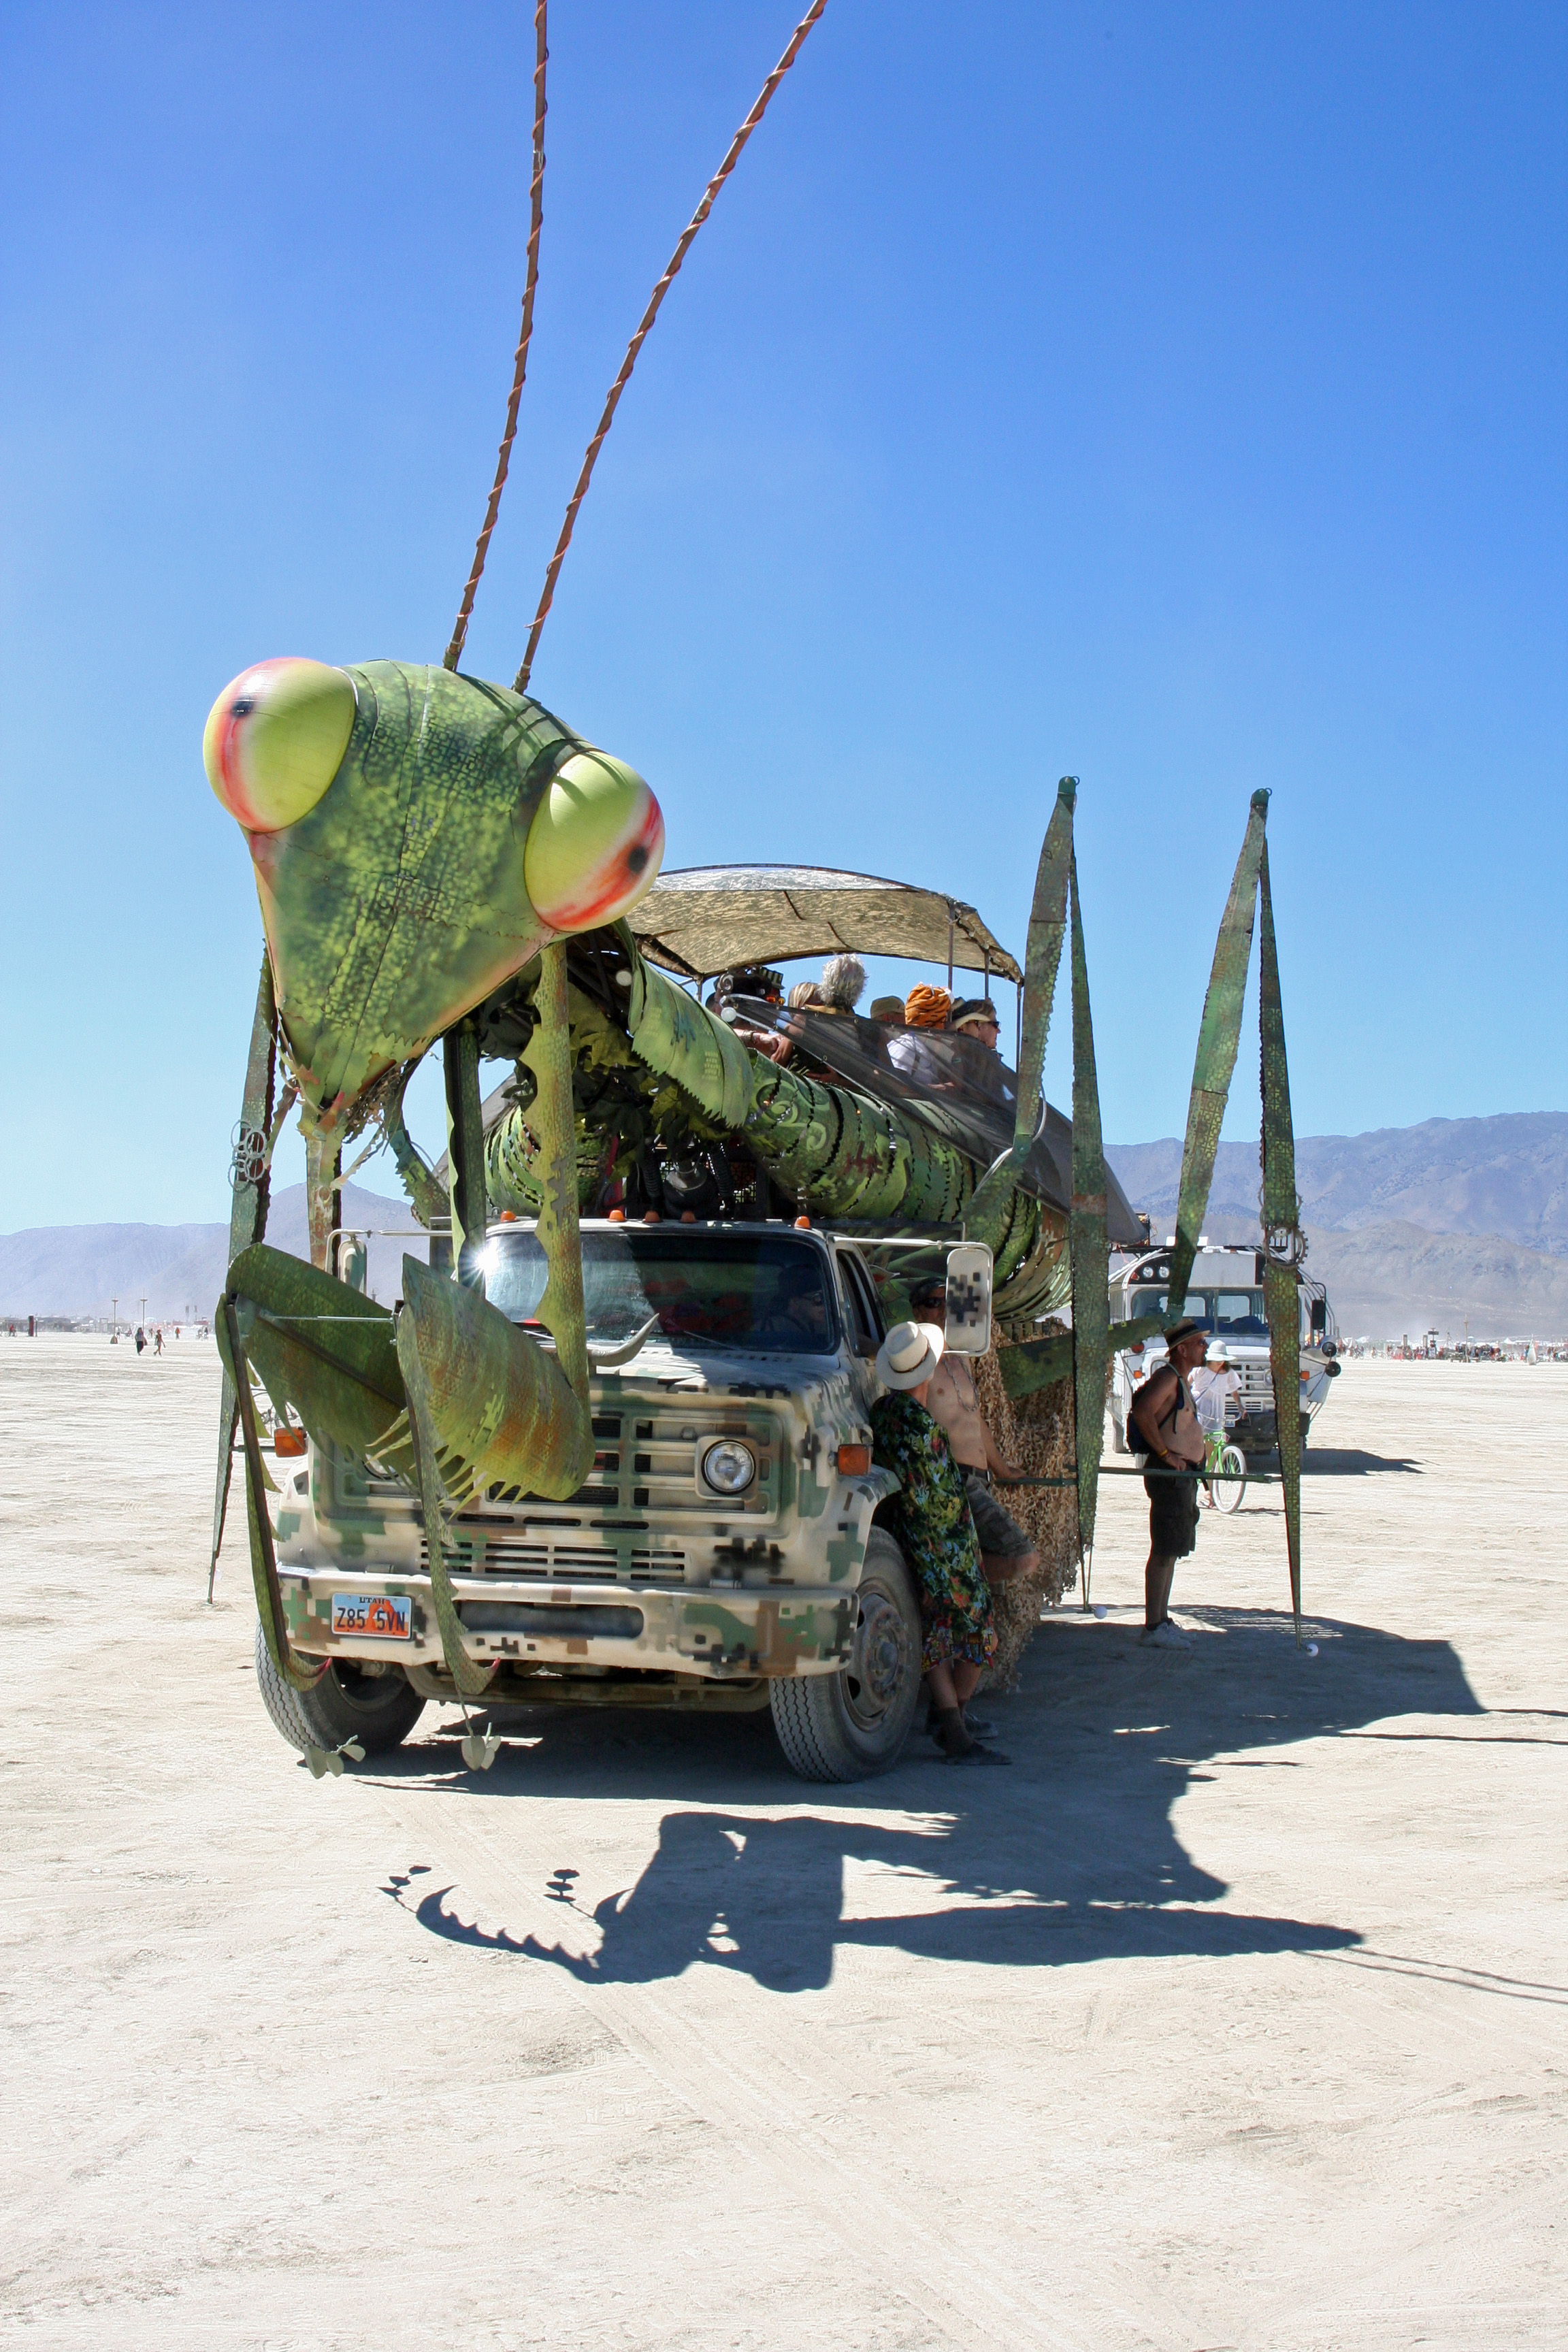 Checking out the hundreds of mutant vehicles at Burning Man is definitely entertainemnt and could take up much of your week. 